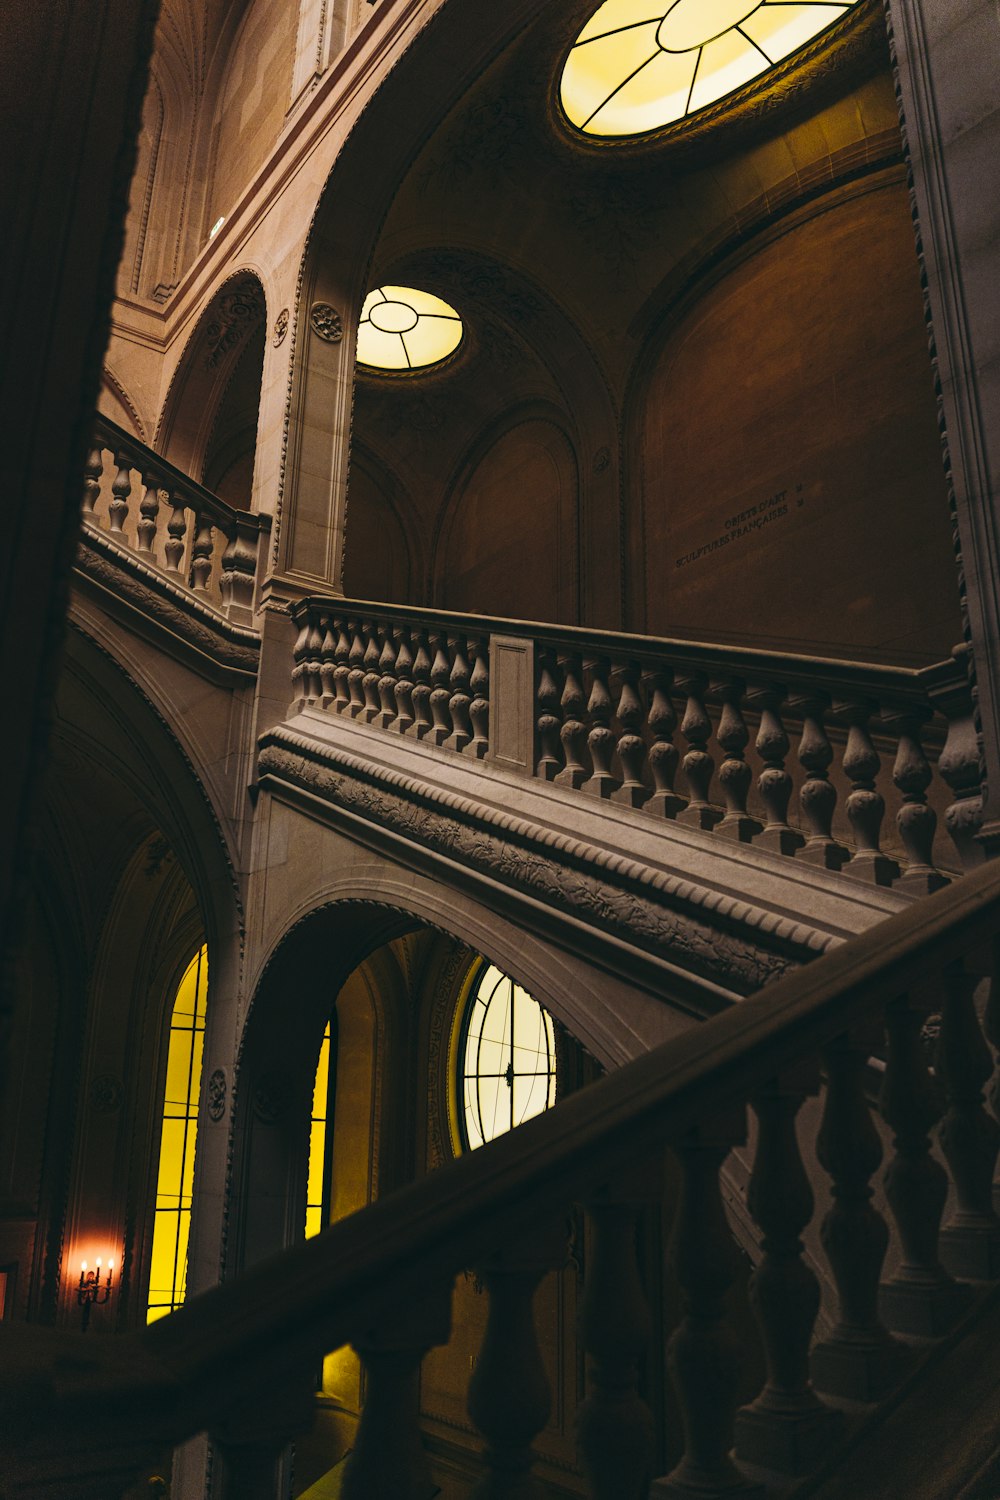 a staircase in a building with stained glass windows